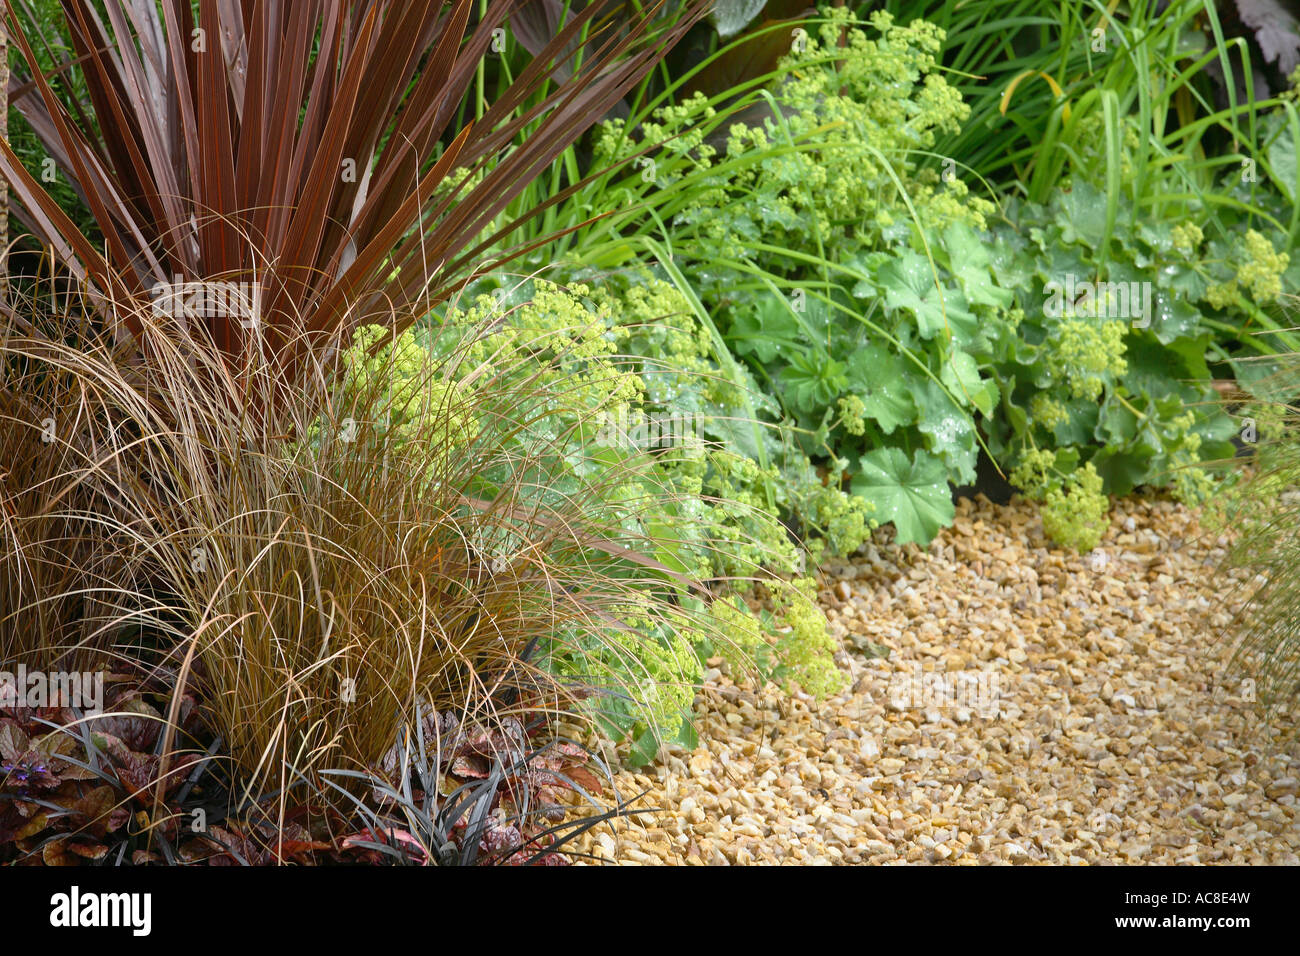 Landscape picture of the edge of a border with Carex, Cordyline and Alchemilla Mollis. THE PATH NOT TAKEN. DESIGNERS:JAMES MASON & CHLOE GAZZARD. Stock Photo